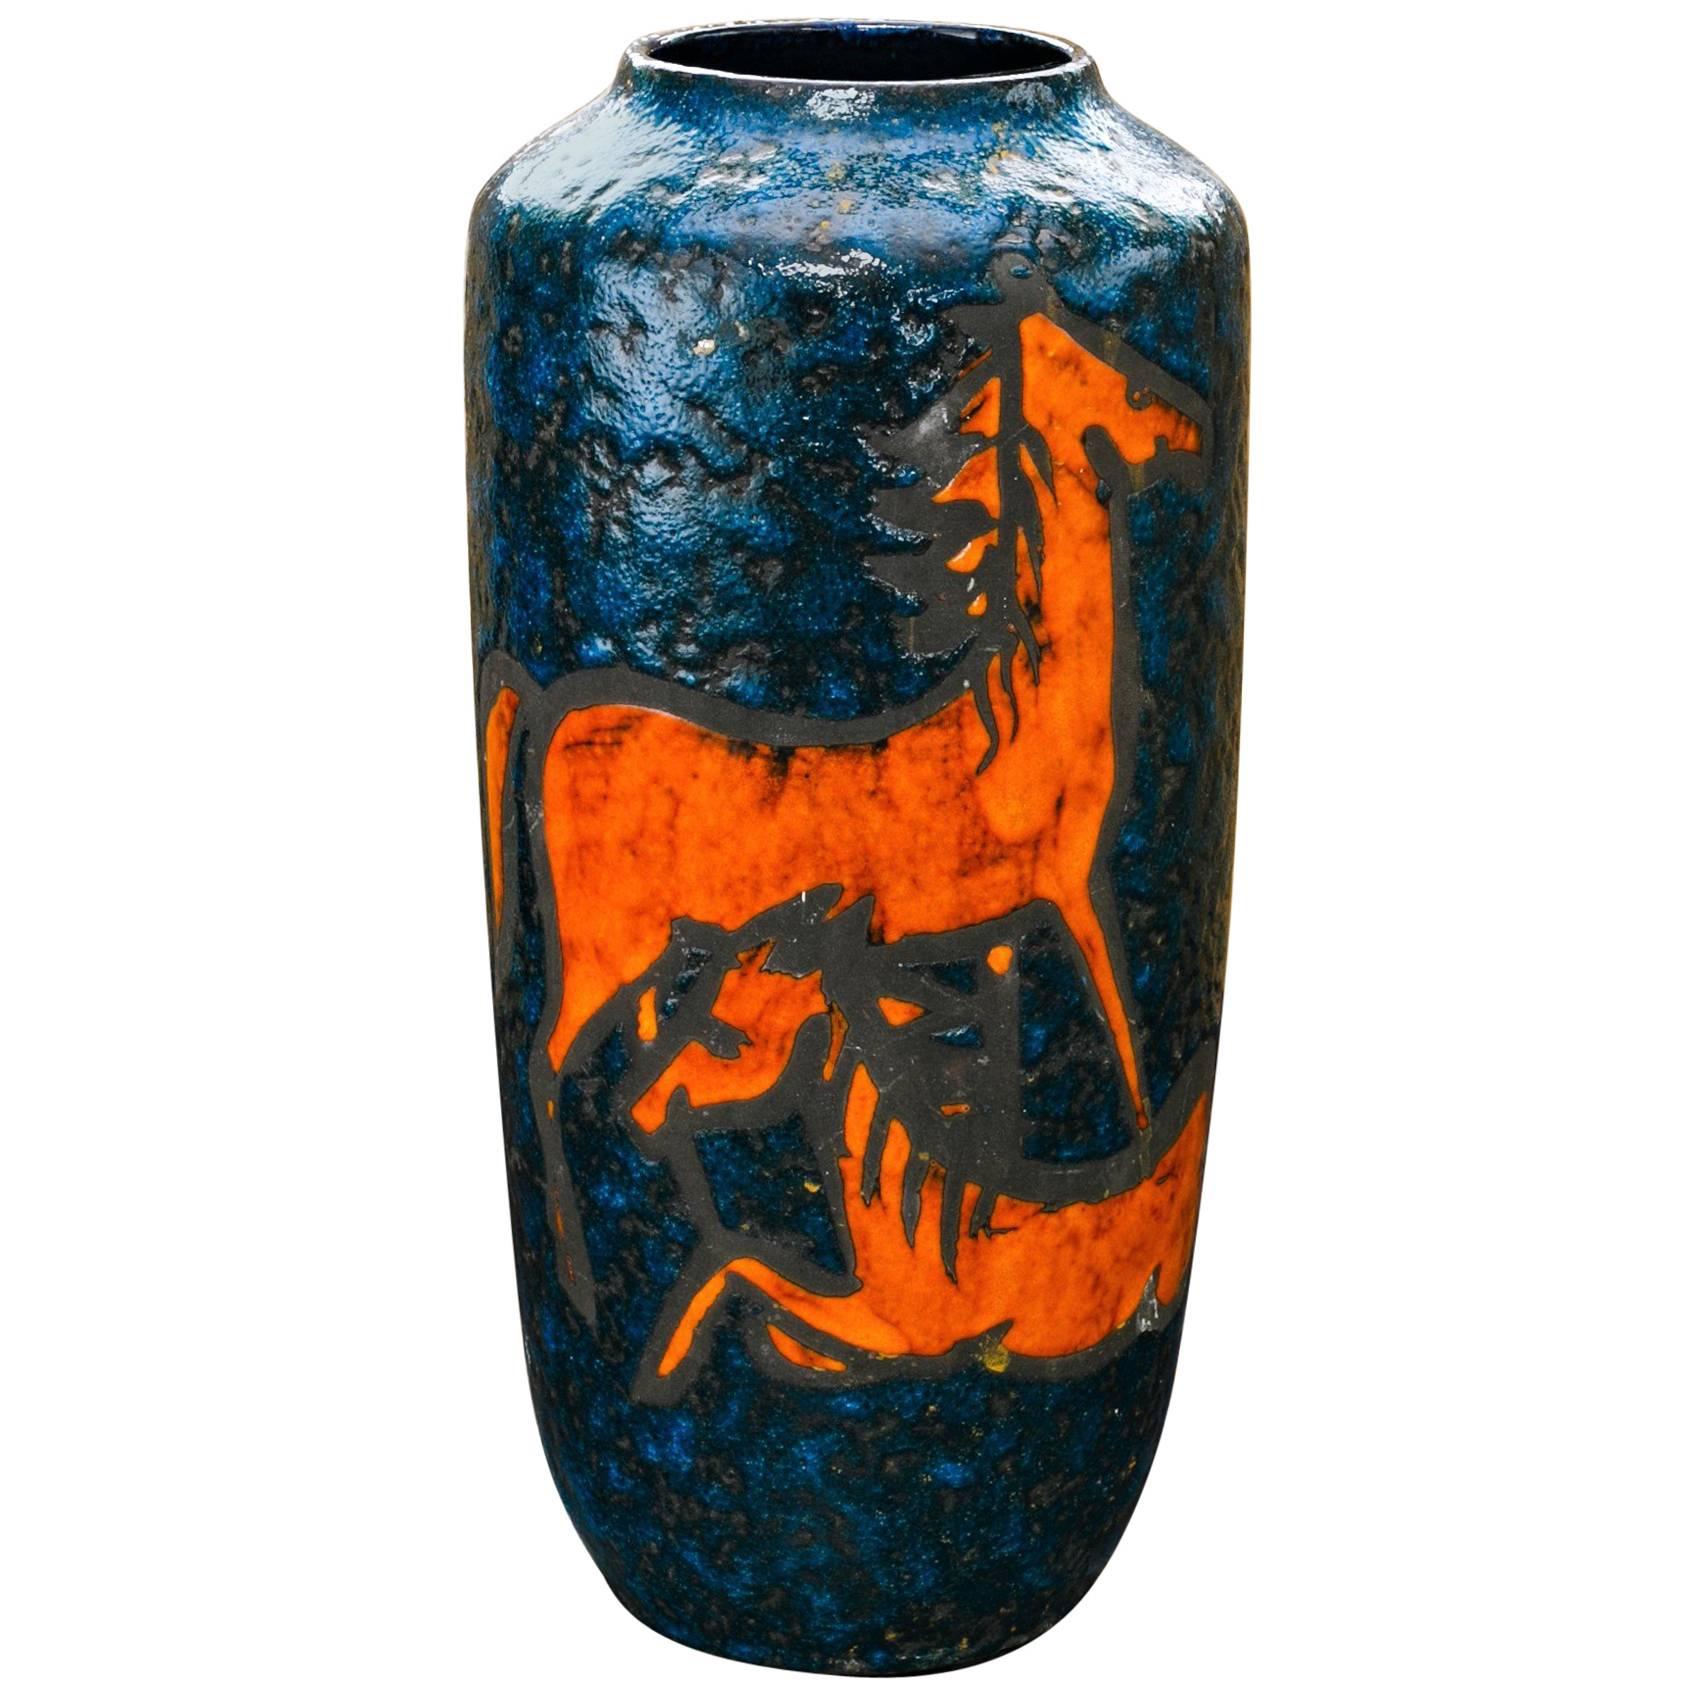 Tall European Handcrafted Blue and Orange Vase with Horses